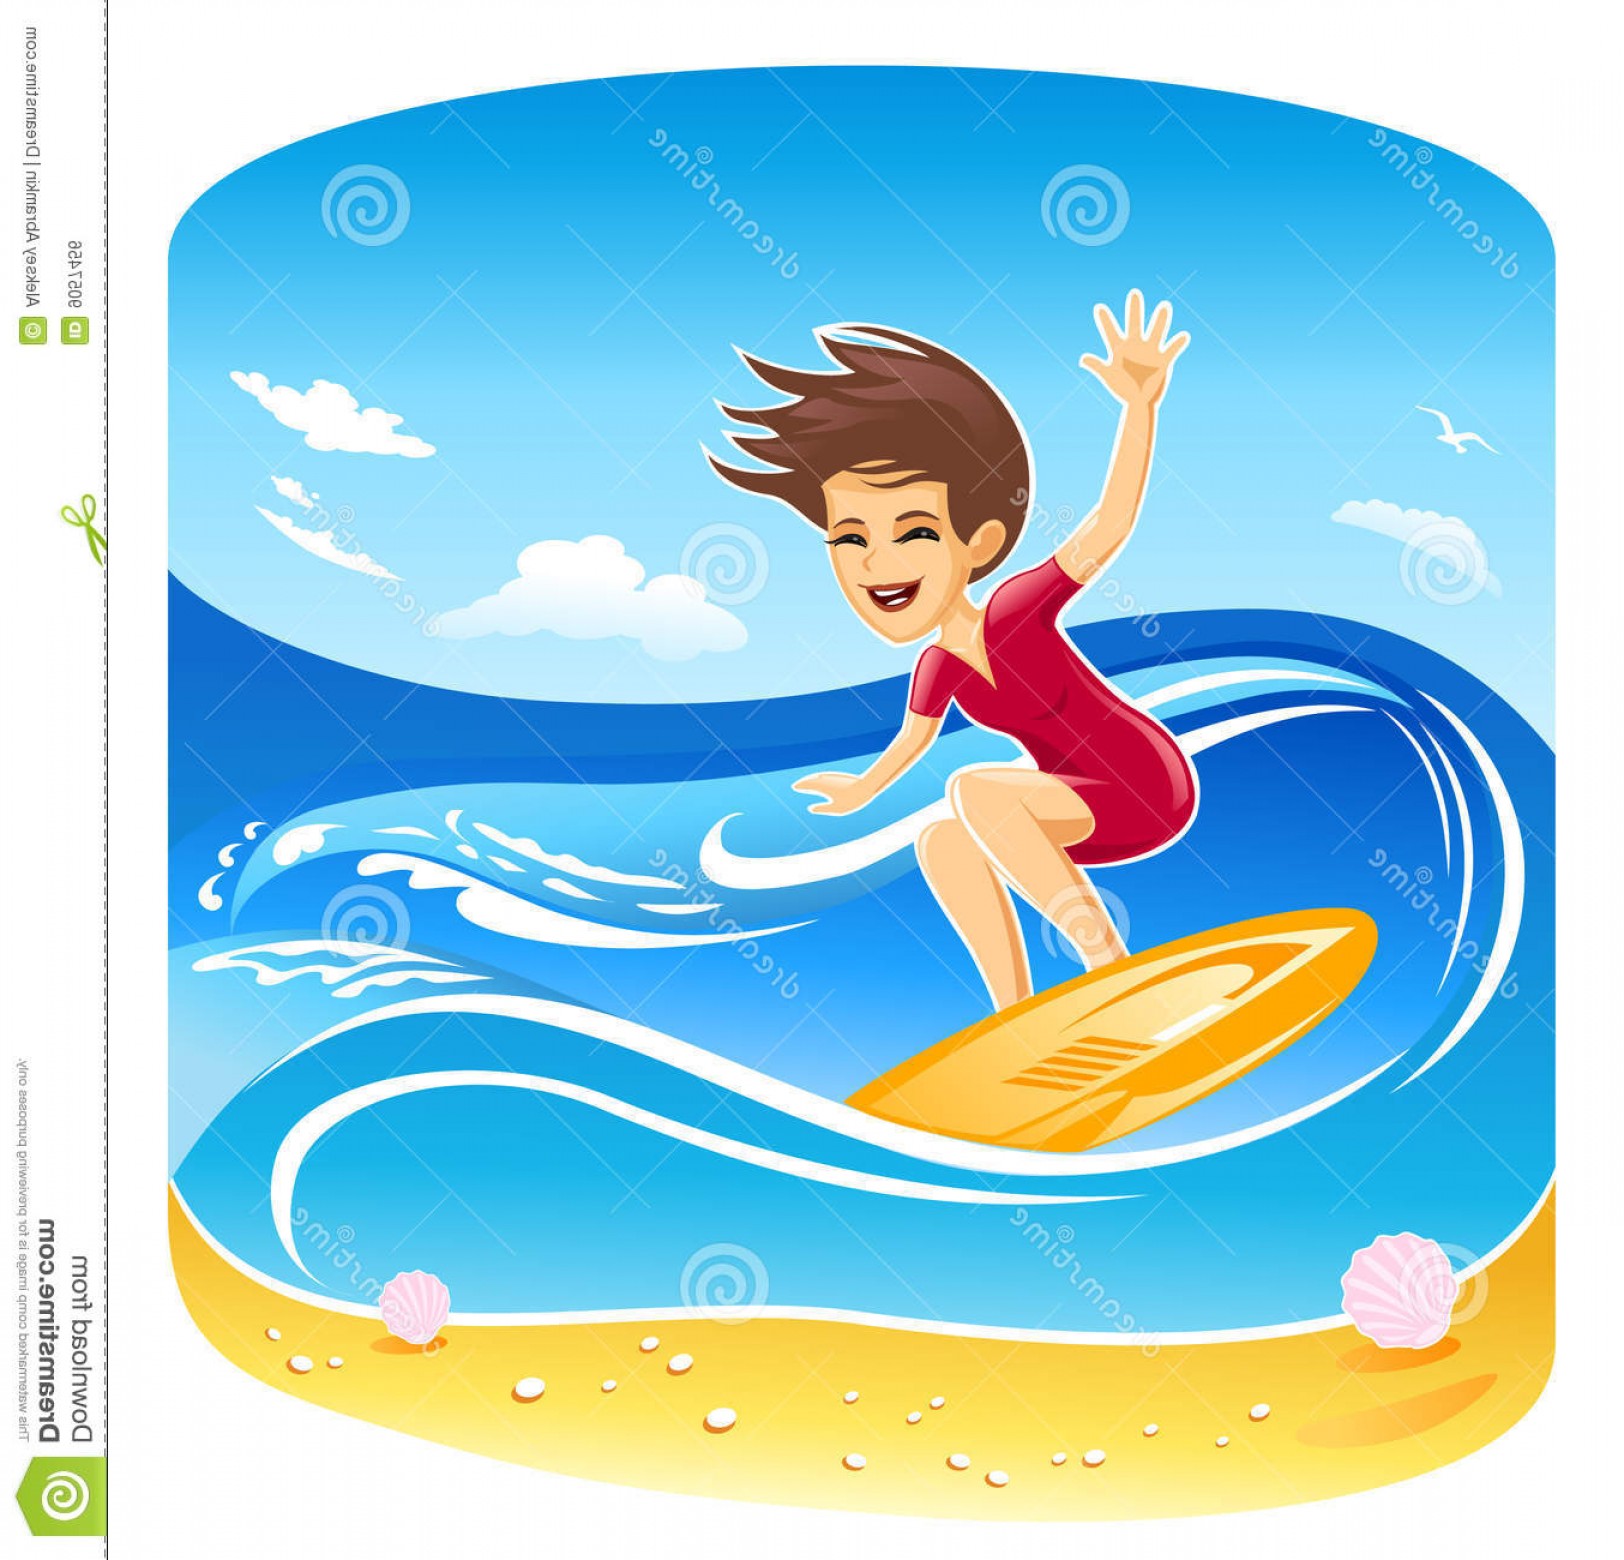 Royalty Free Stock Image Girl Surfer Vector Image